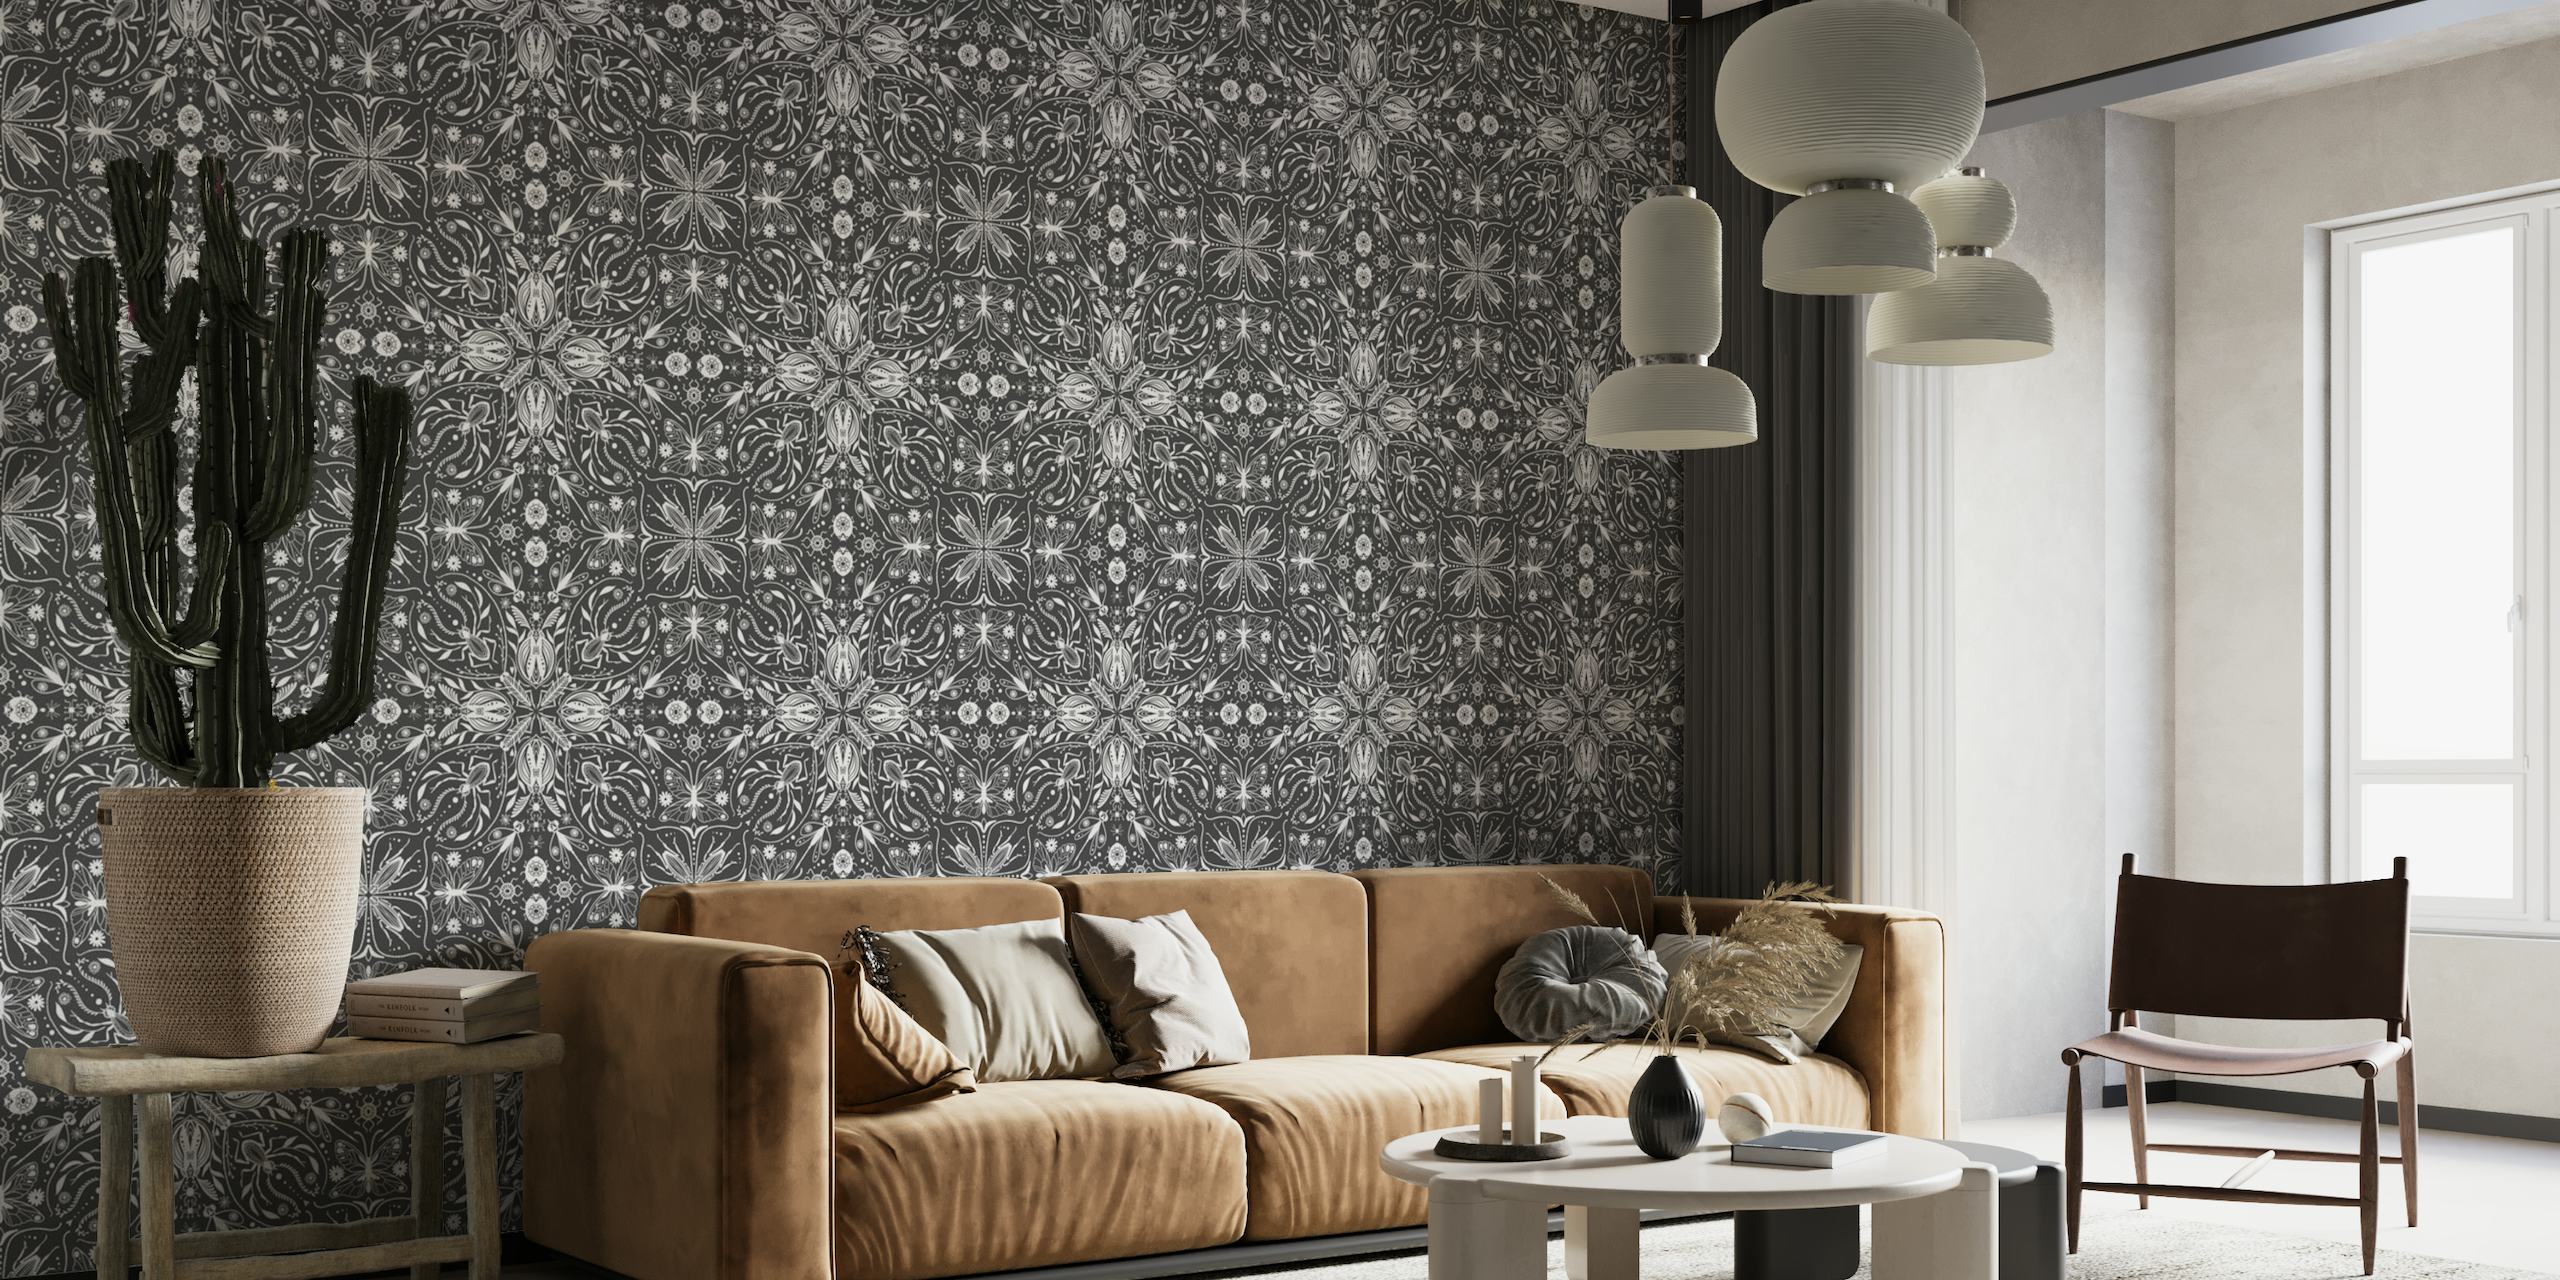 Symmetrical black and white wall mural with insect and floral pattern